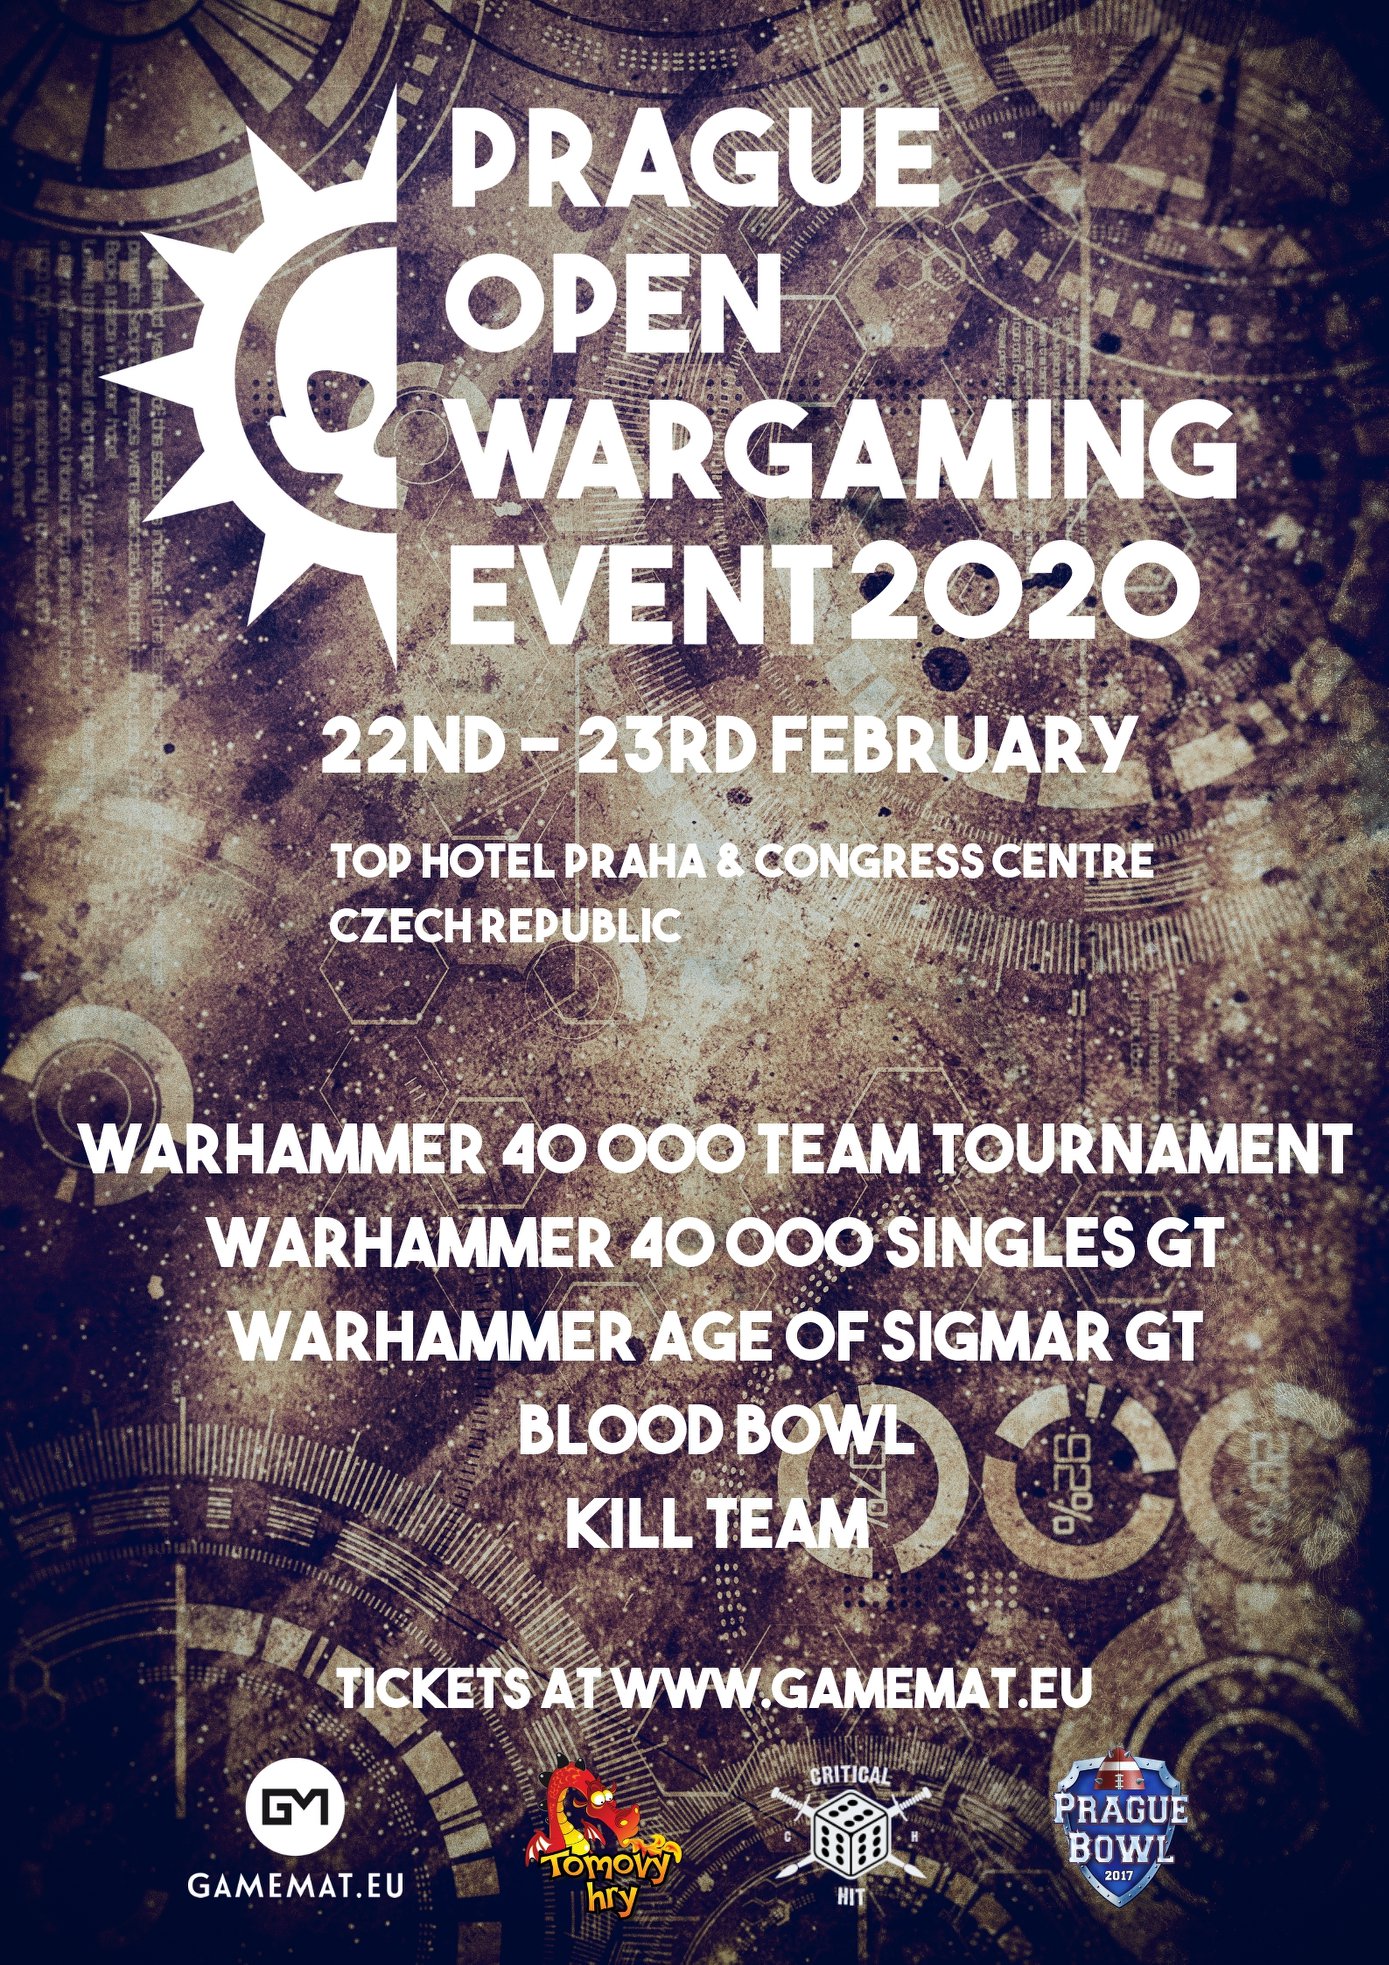 Prague Open 2020 wargaming event is here!